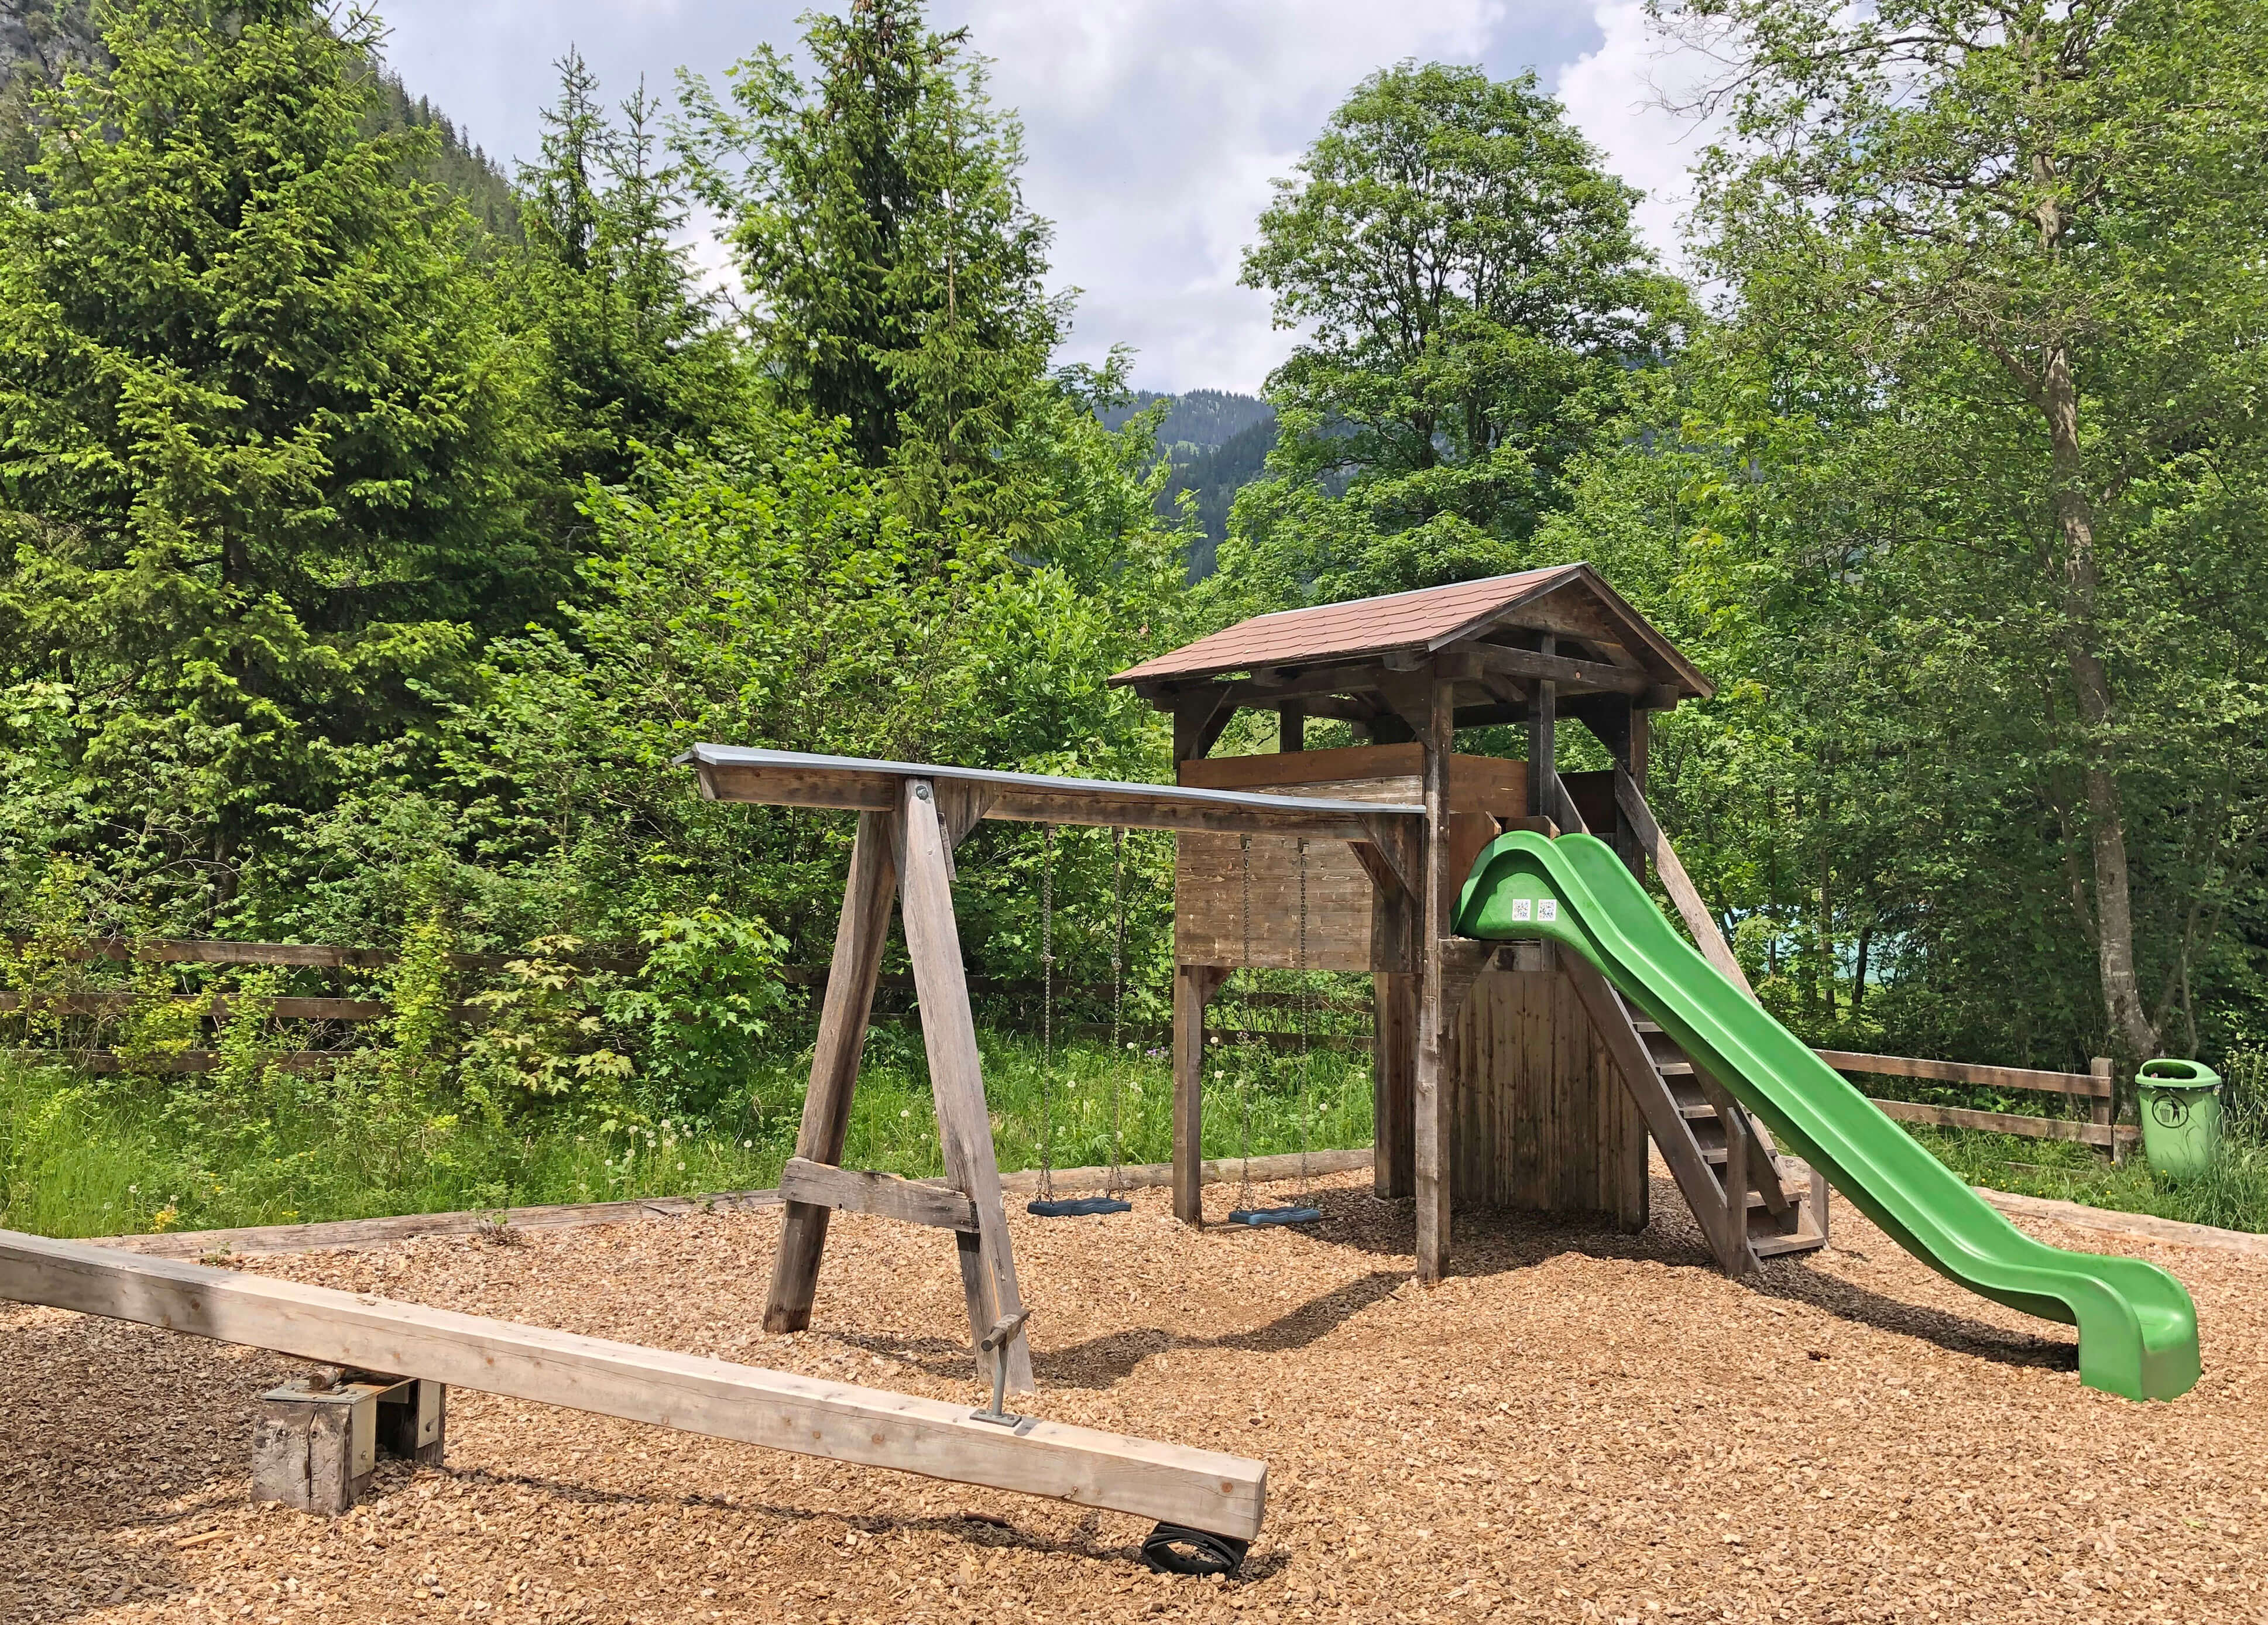 The Anger playground with swings and slide